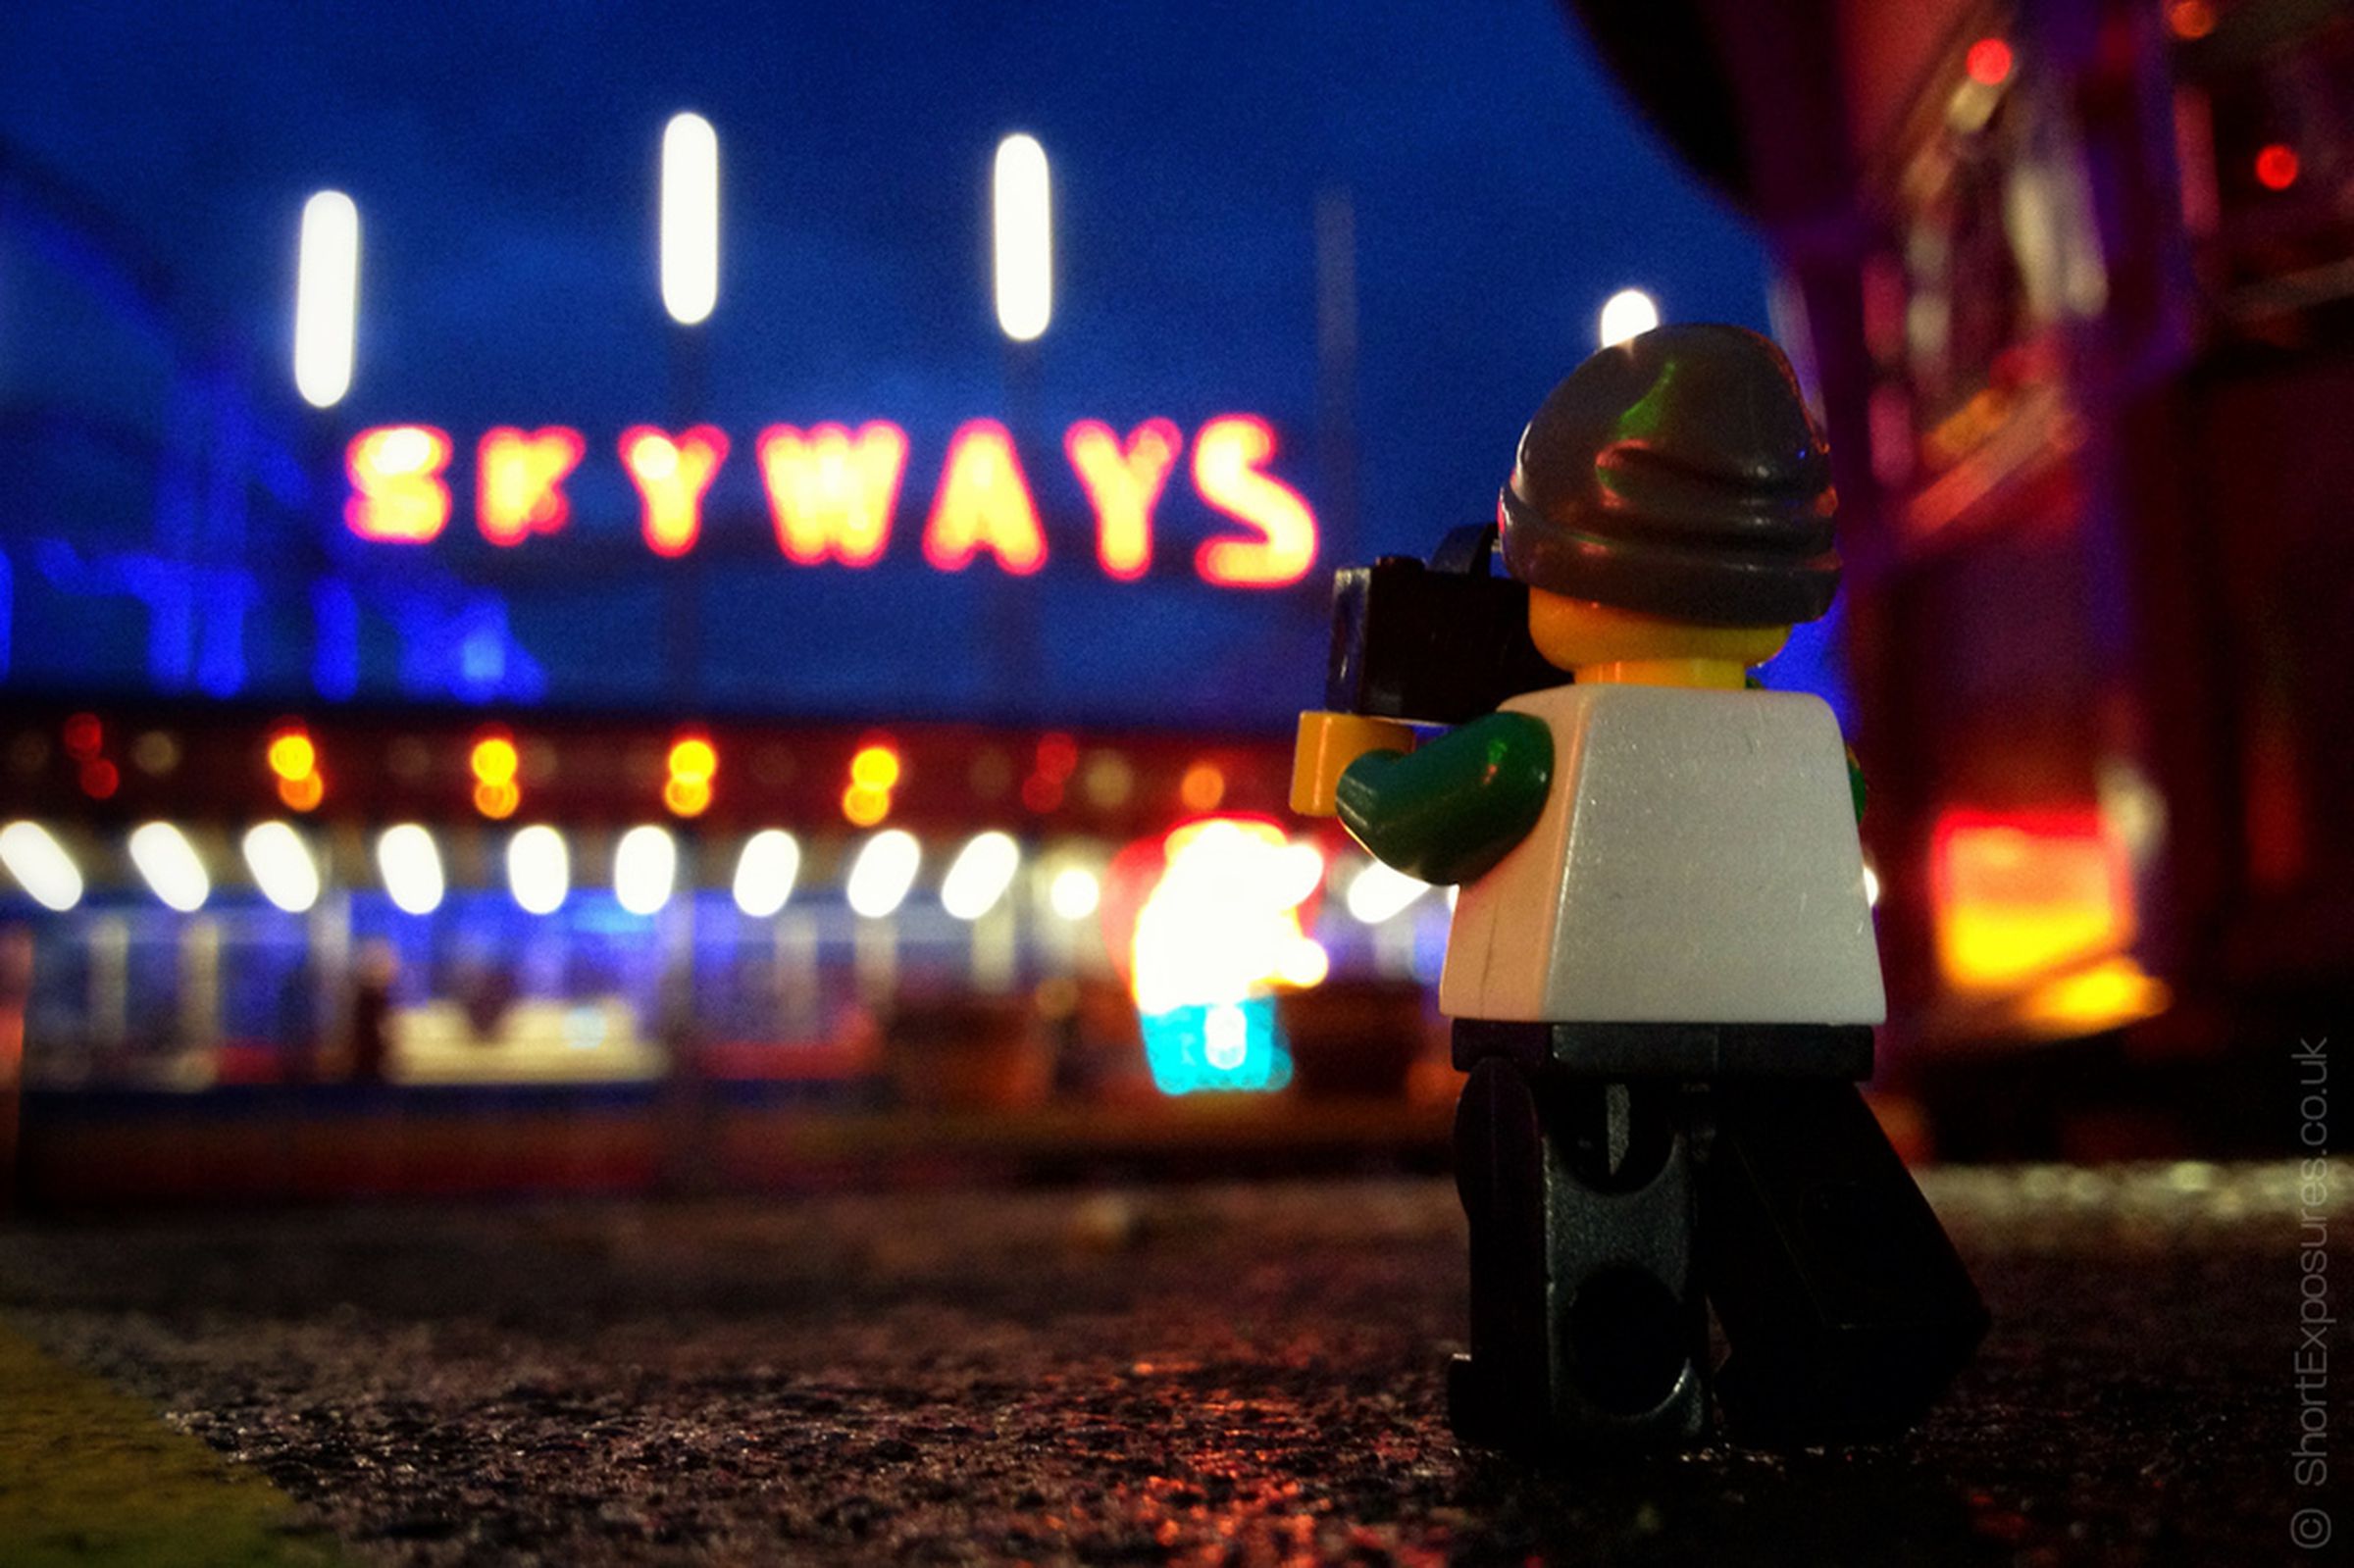 Andrew Whyte's Lego minifig photography